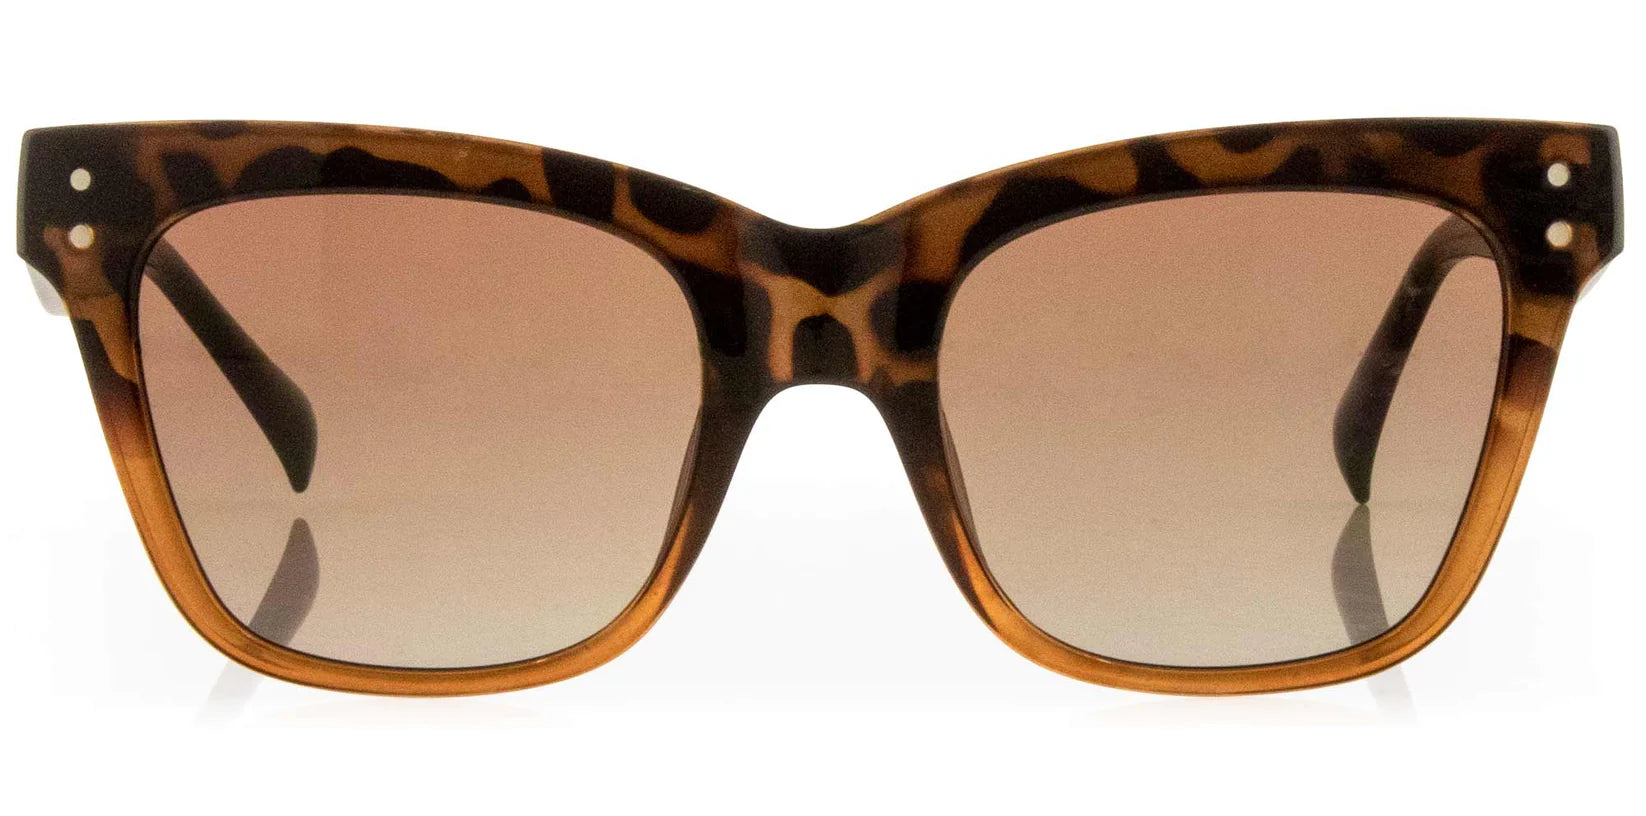 Leopold - Gloss Tortoise to Tobacco / Gradient Brown Lens